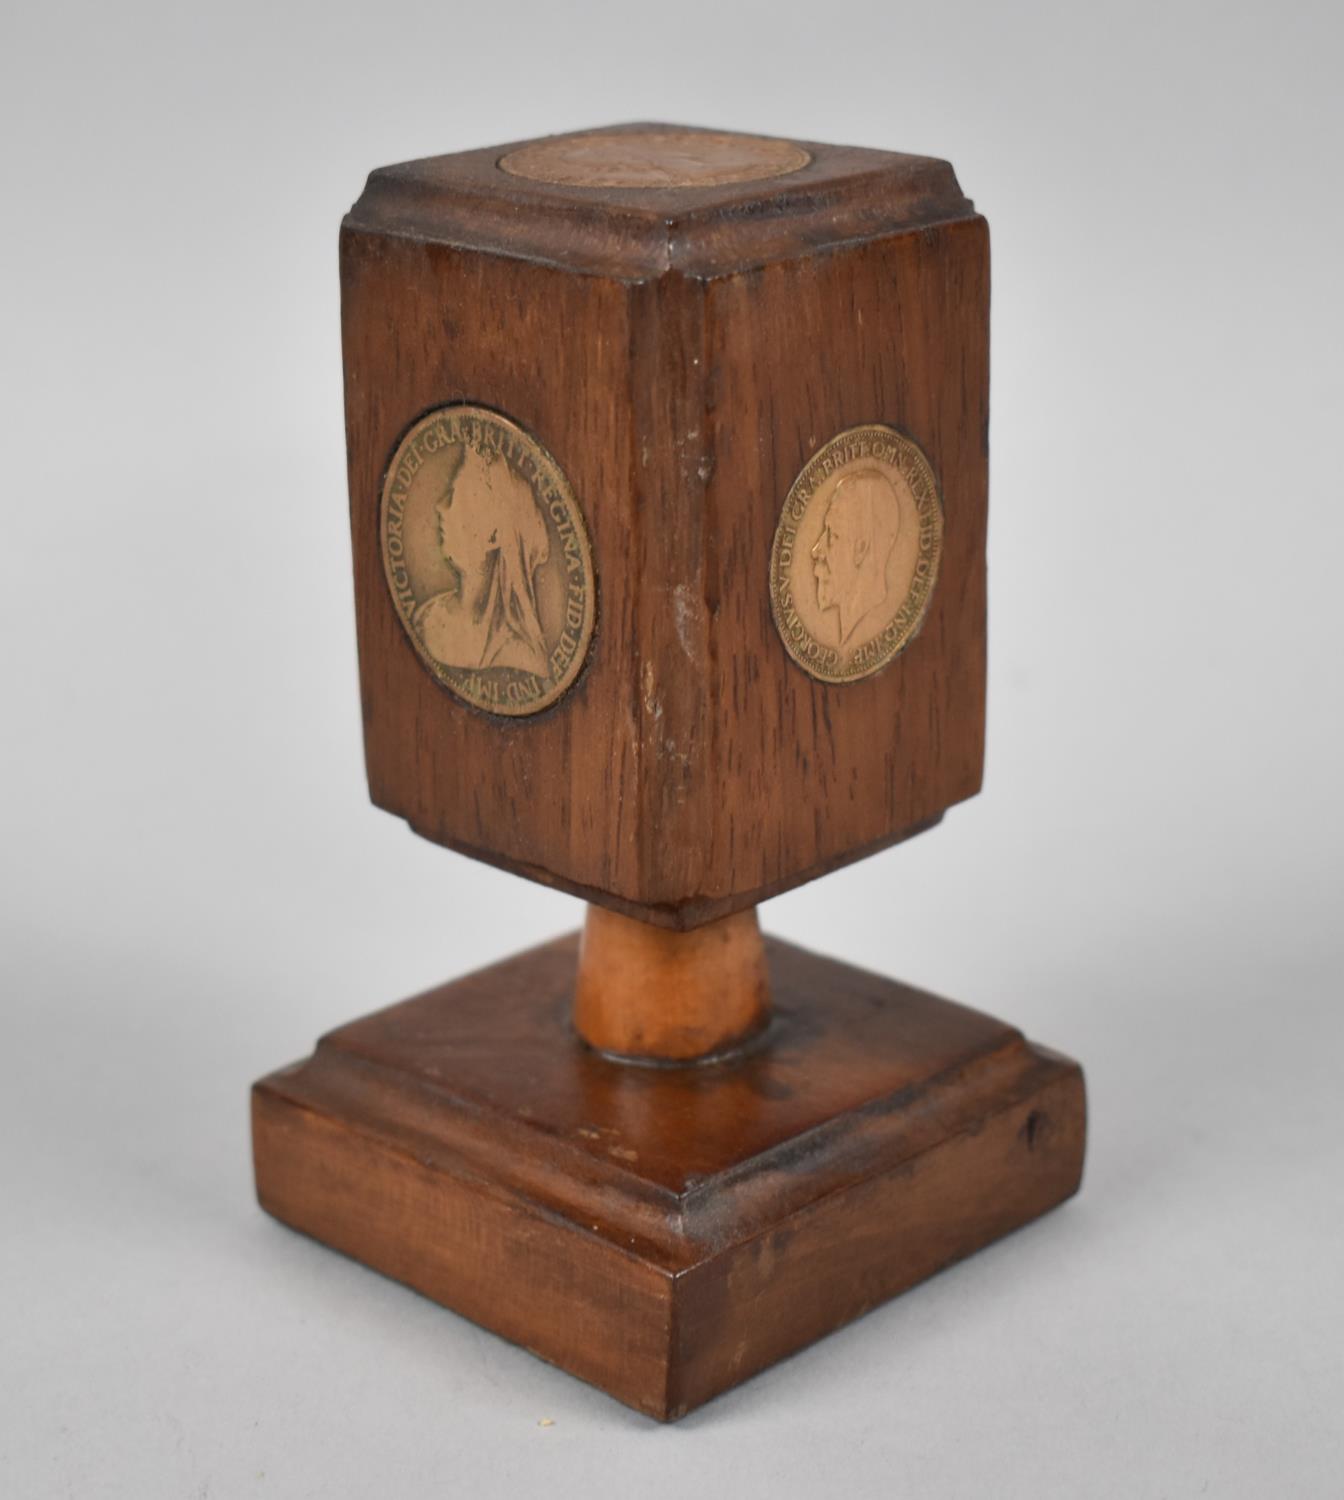 A Novelty Desk Top Wooden paperweight Mounted with Coins from Victoria to Elizabeth, 12cms High